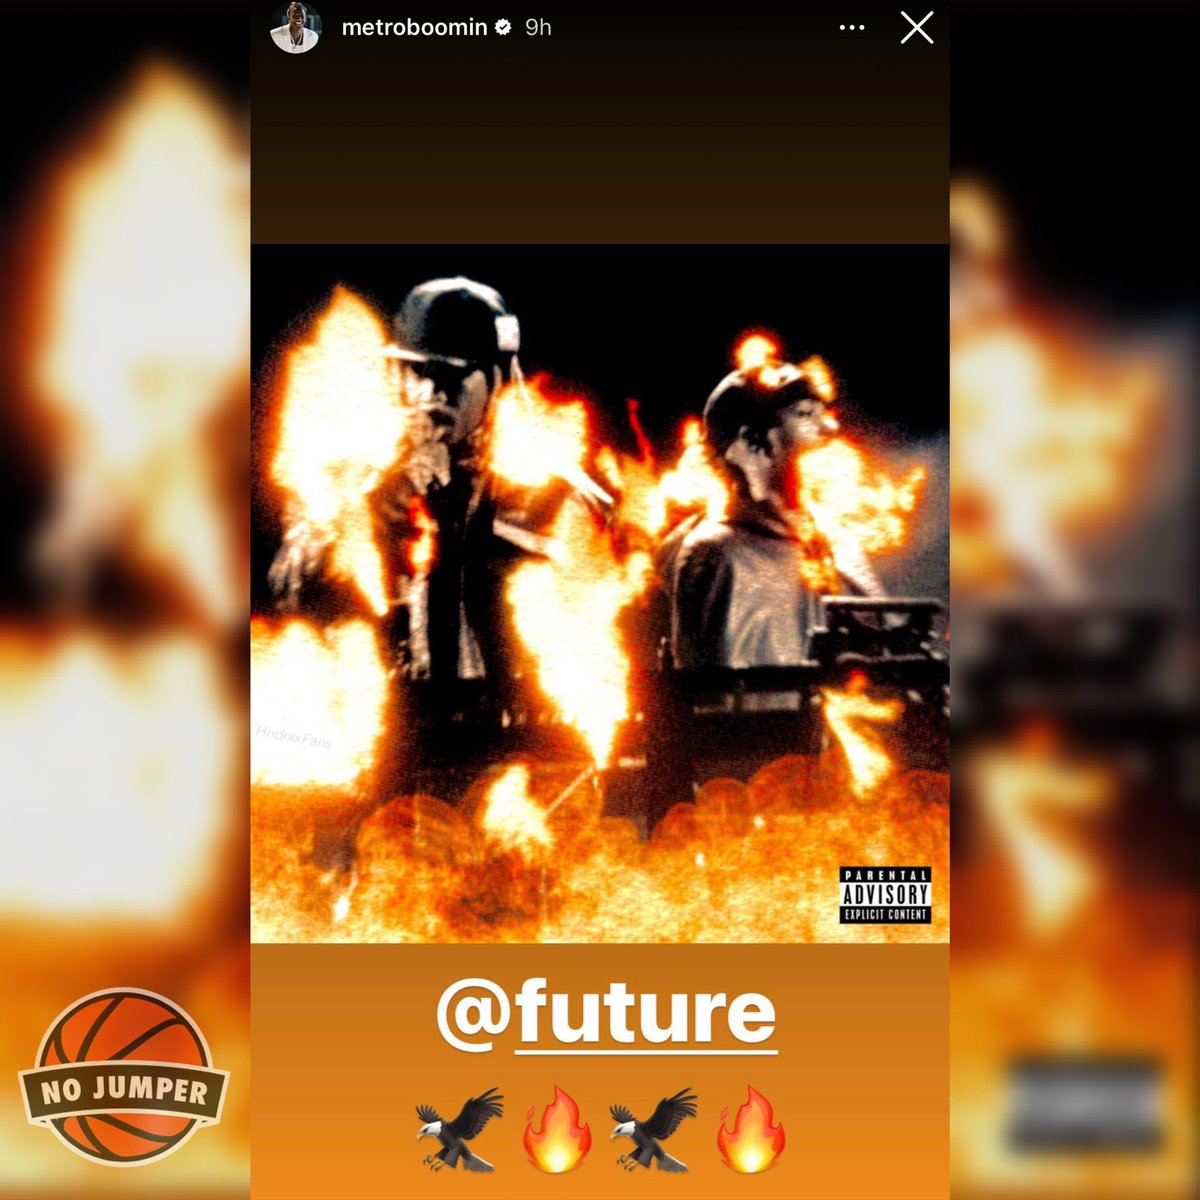 No Jumper on Twitter "Metro Boomin reveals possible artwork for collab